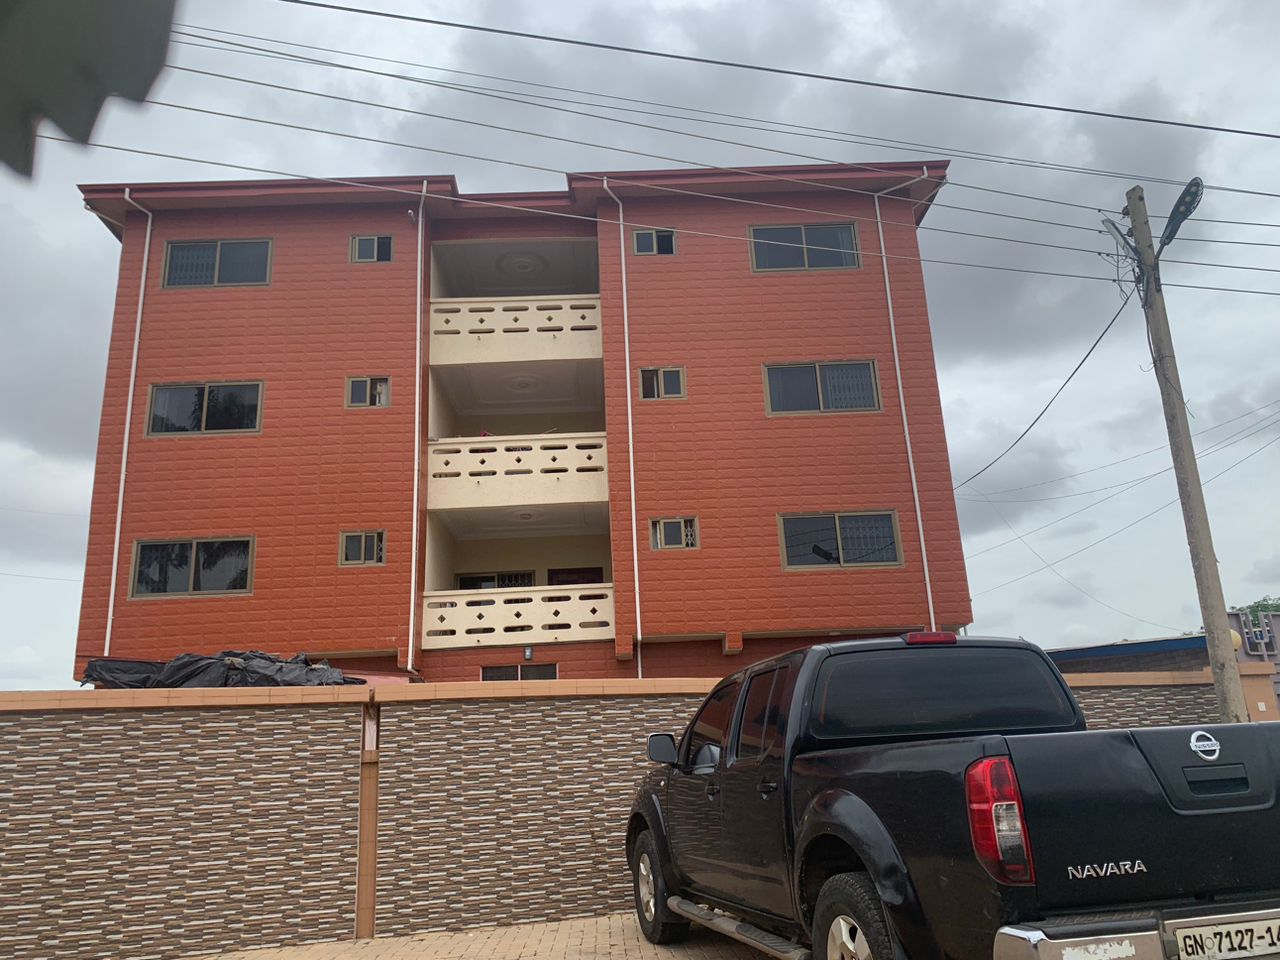 Three bedroom newly built apartment for rent at TUC, Kumasi